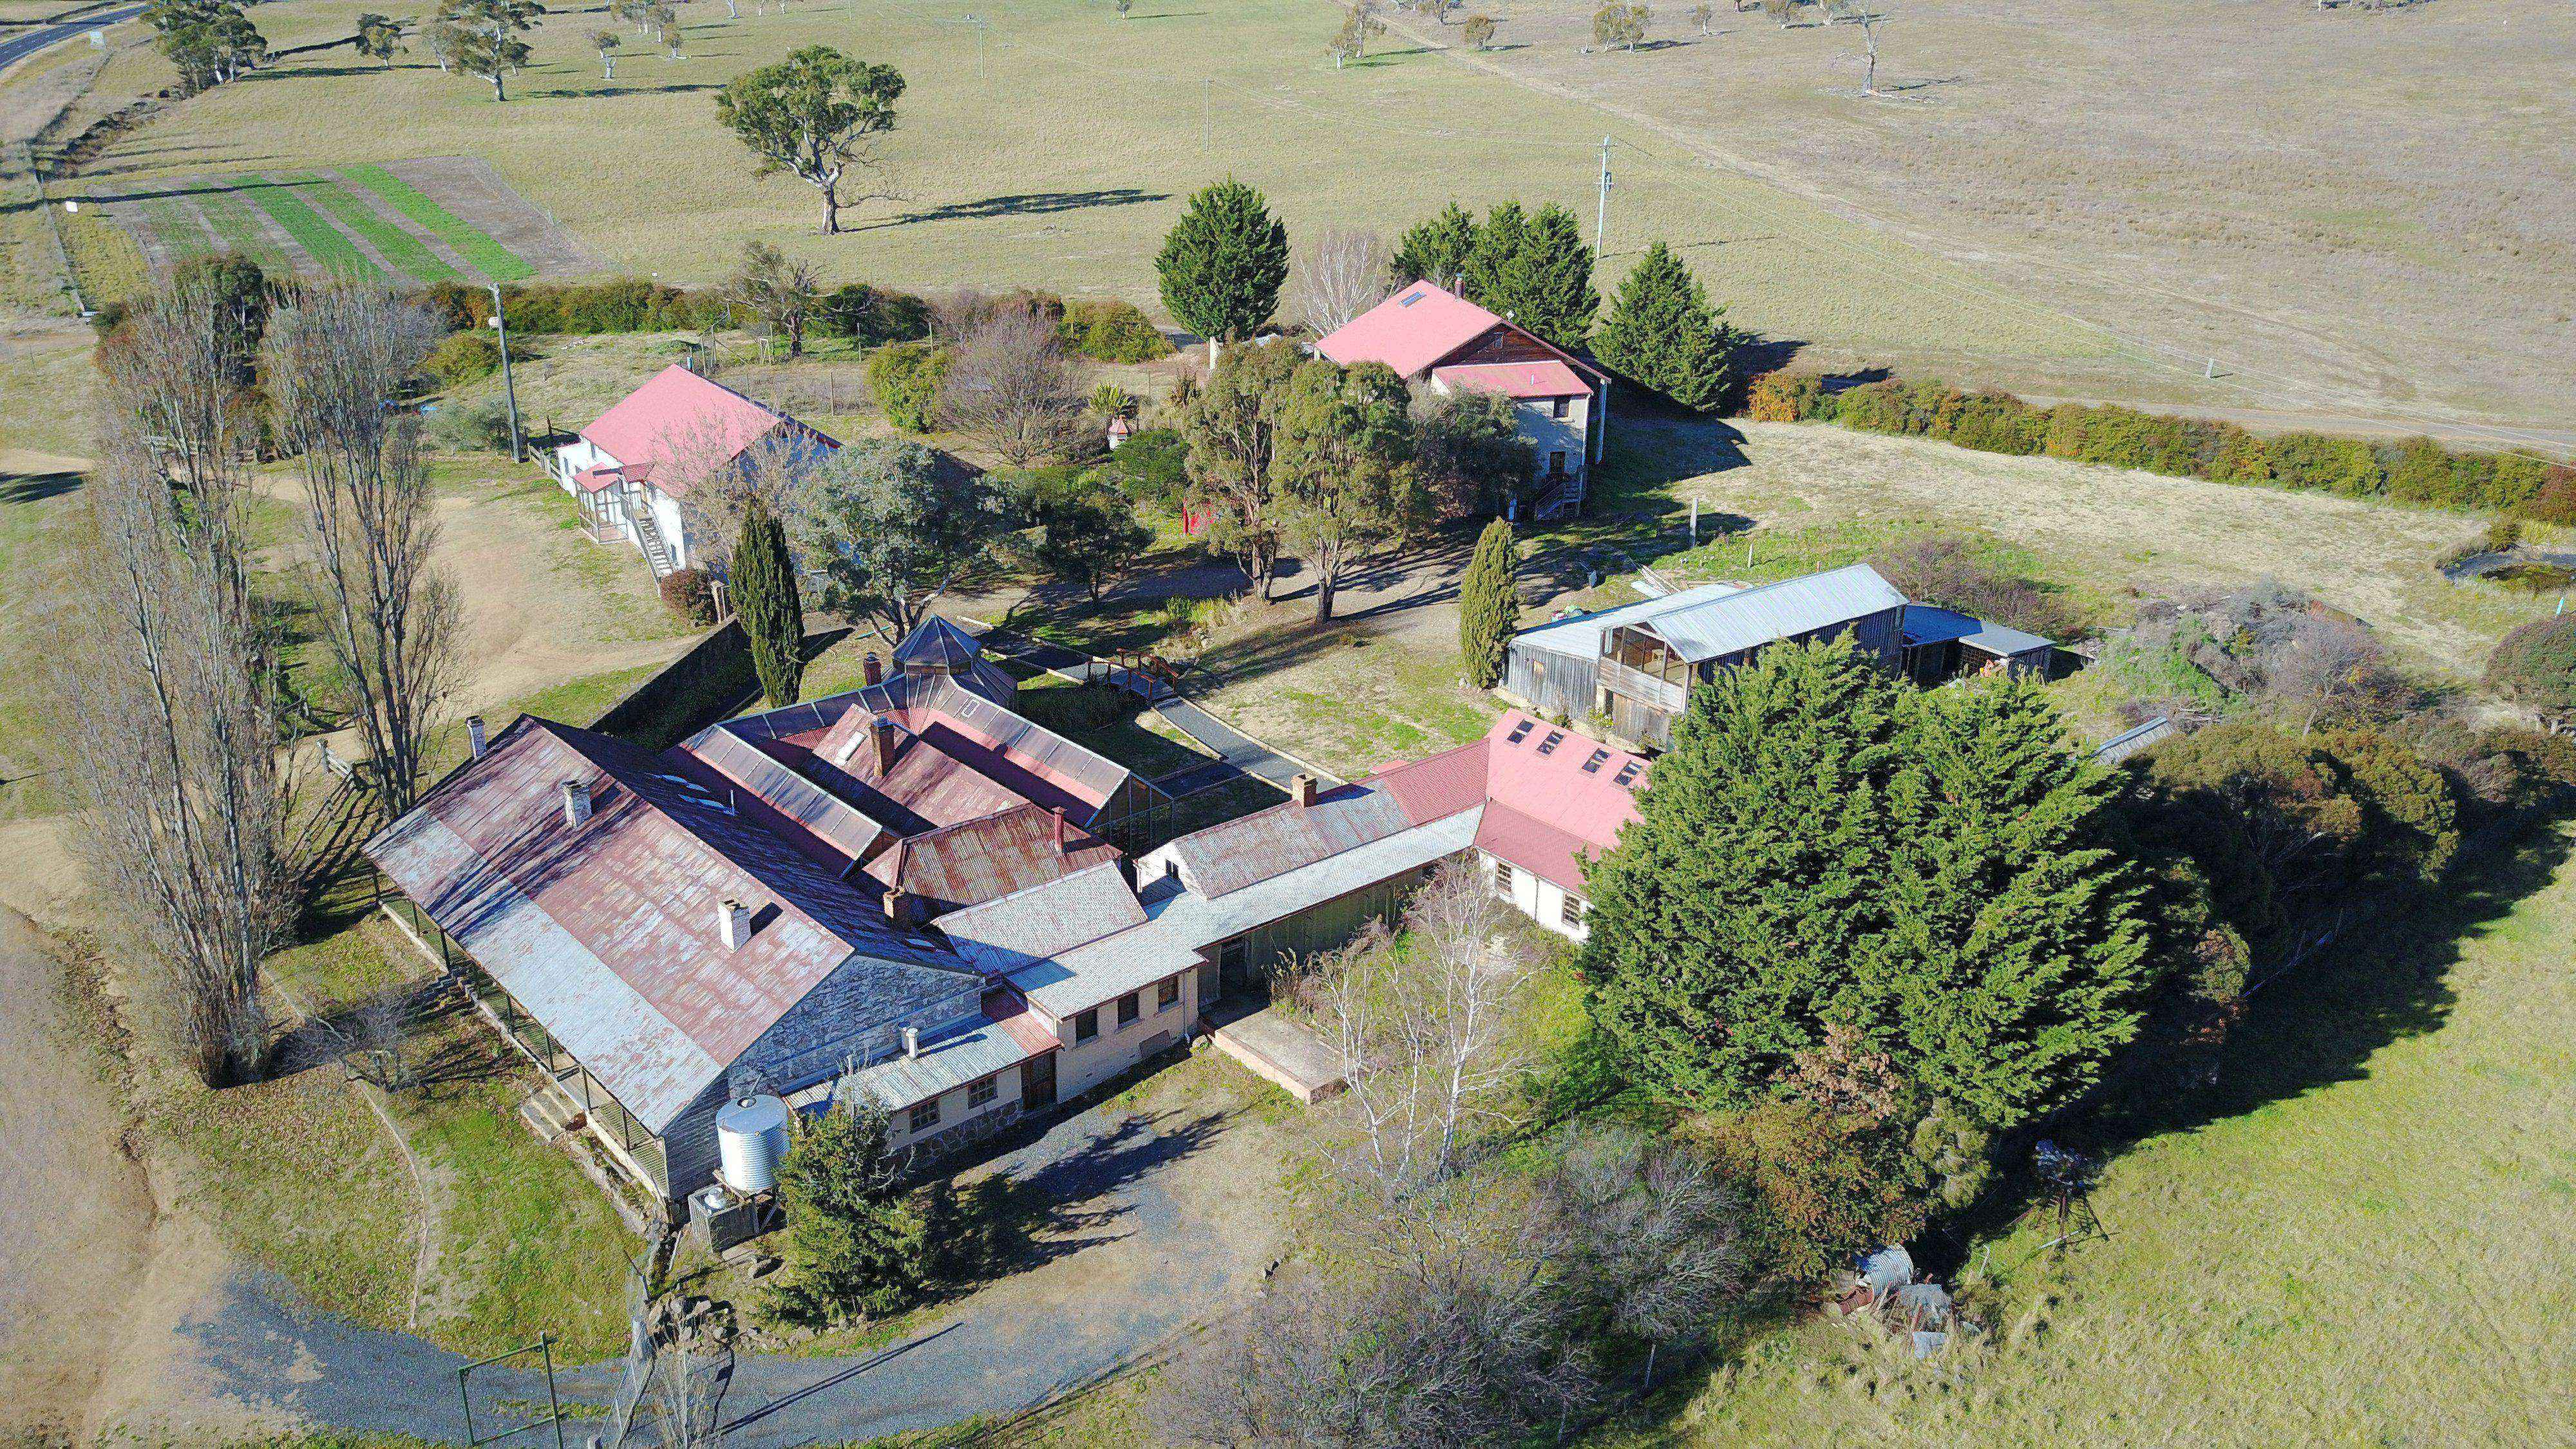 Property near Cooma offers everything from a home to an old inn